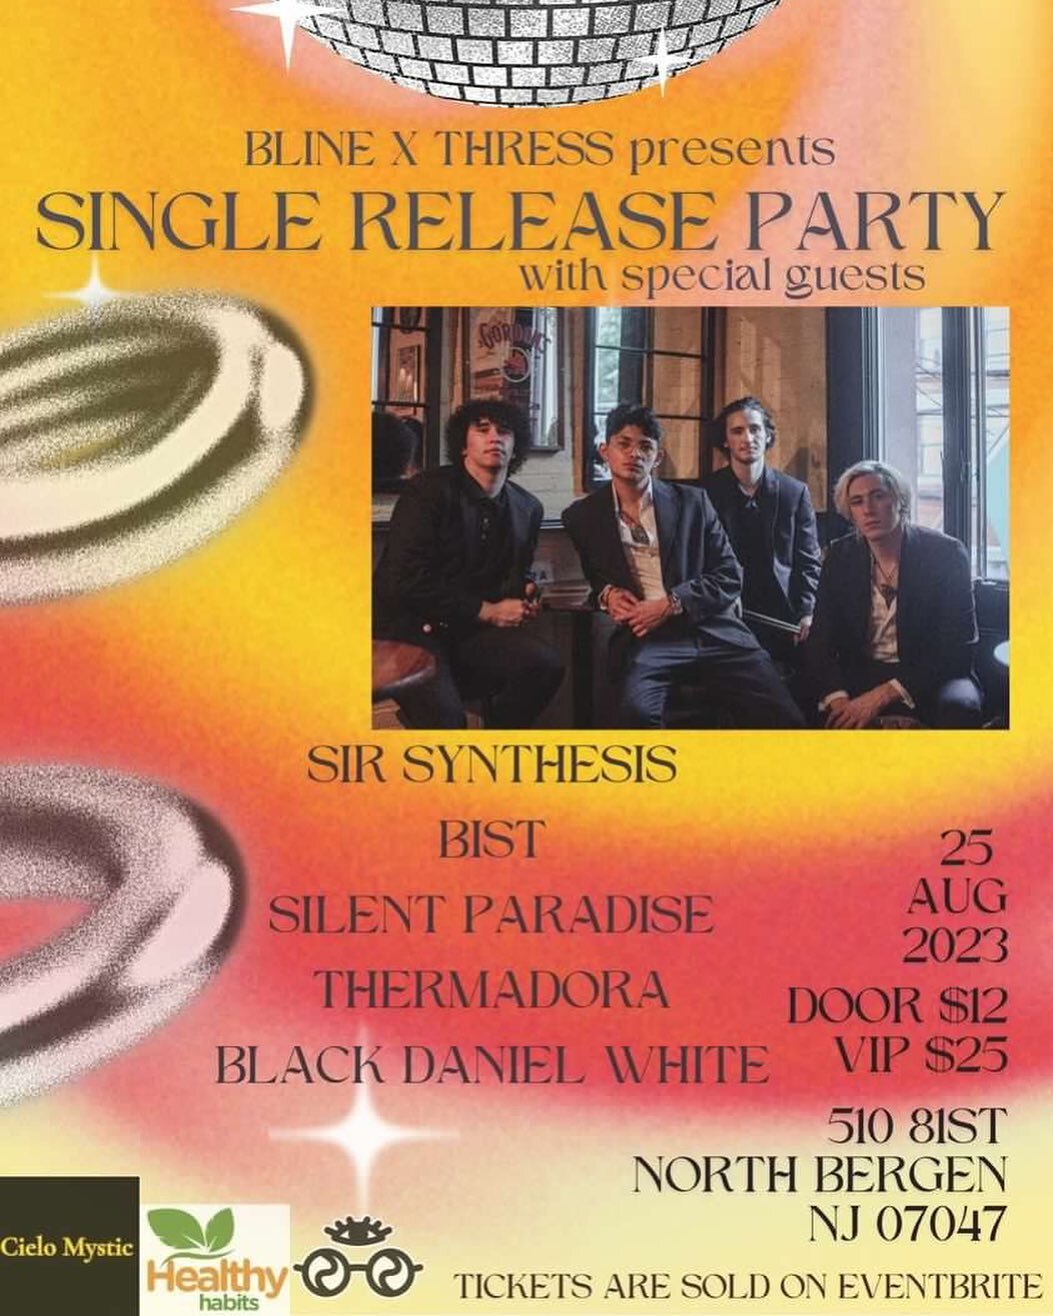 🚨🚨BIG SHOW INCOMING!!!🚨🚨

We&rsquo;ll be playing in North Bergen Friday the 25th to support @sirsynthesis at their single release party!!! 

🎟️Ticket link in bio!!!🎟️

Special thanks to @thirdcandy